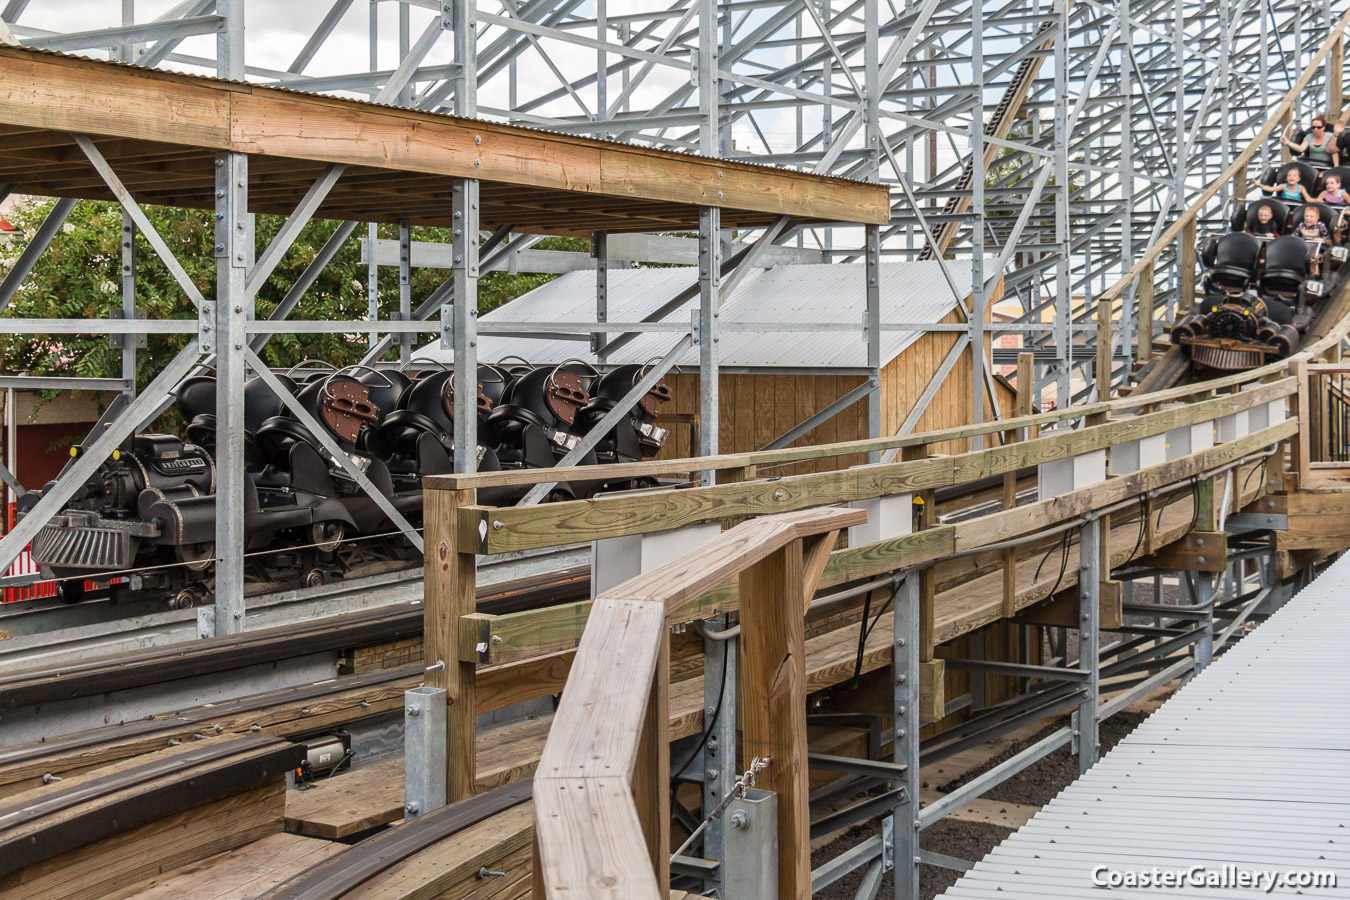 The world's first wooden shuttle coaster - Switchback shuttle coaster at ZDT's Amusement Park